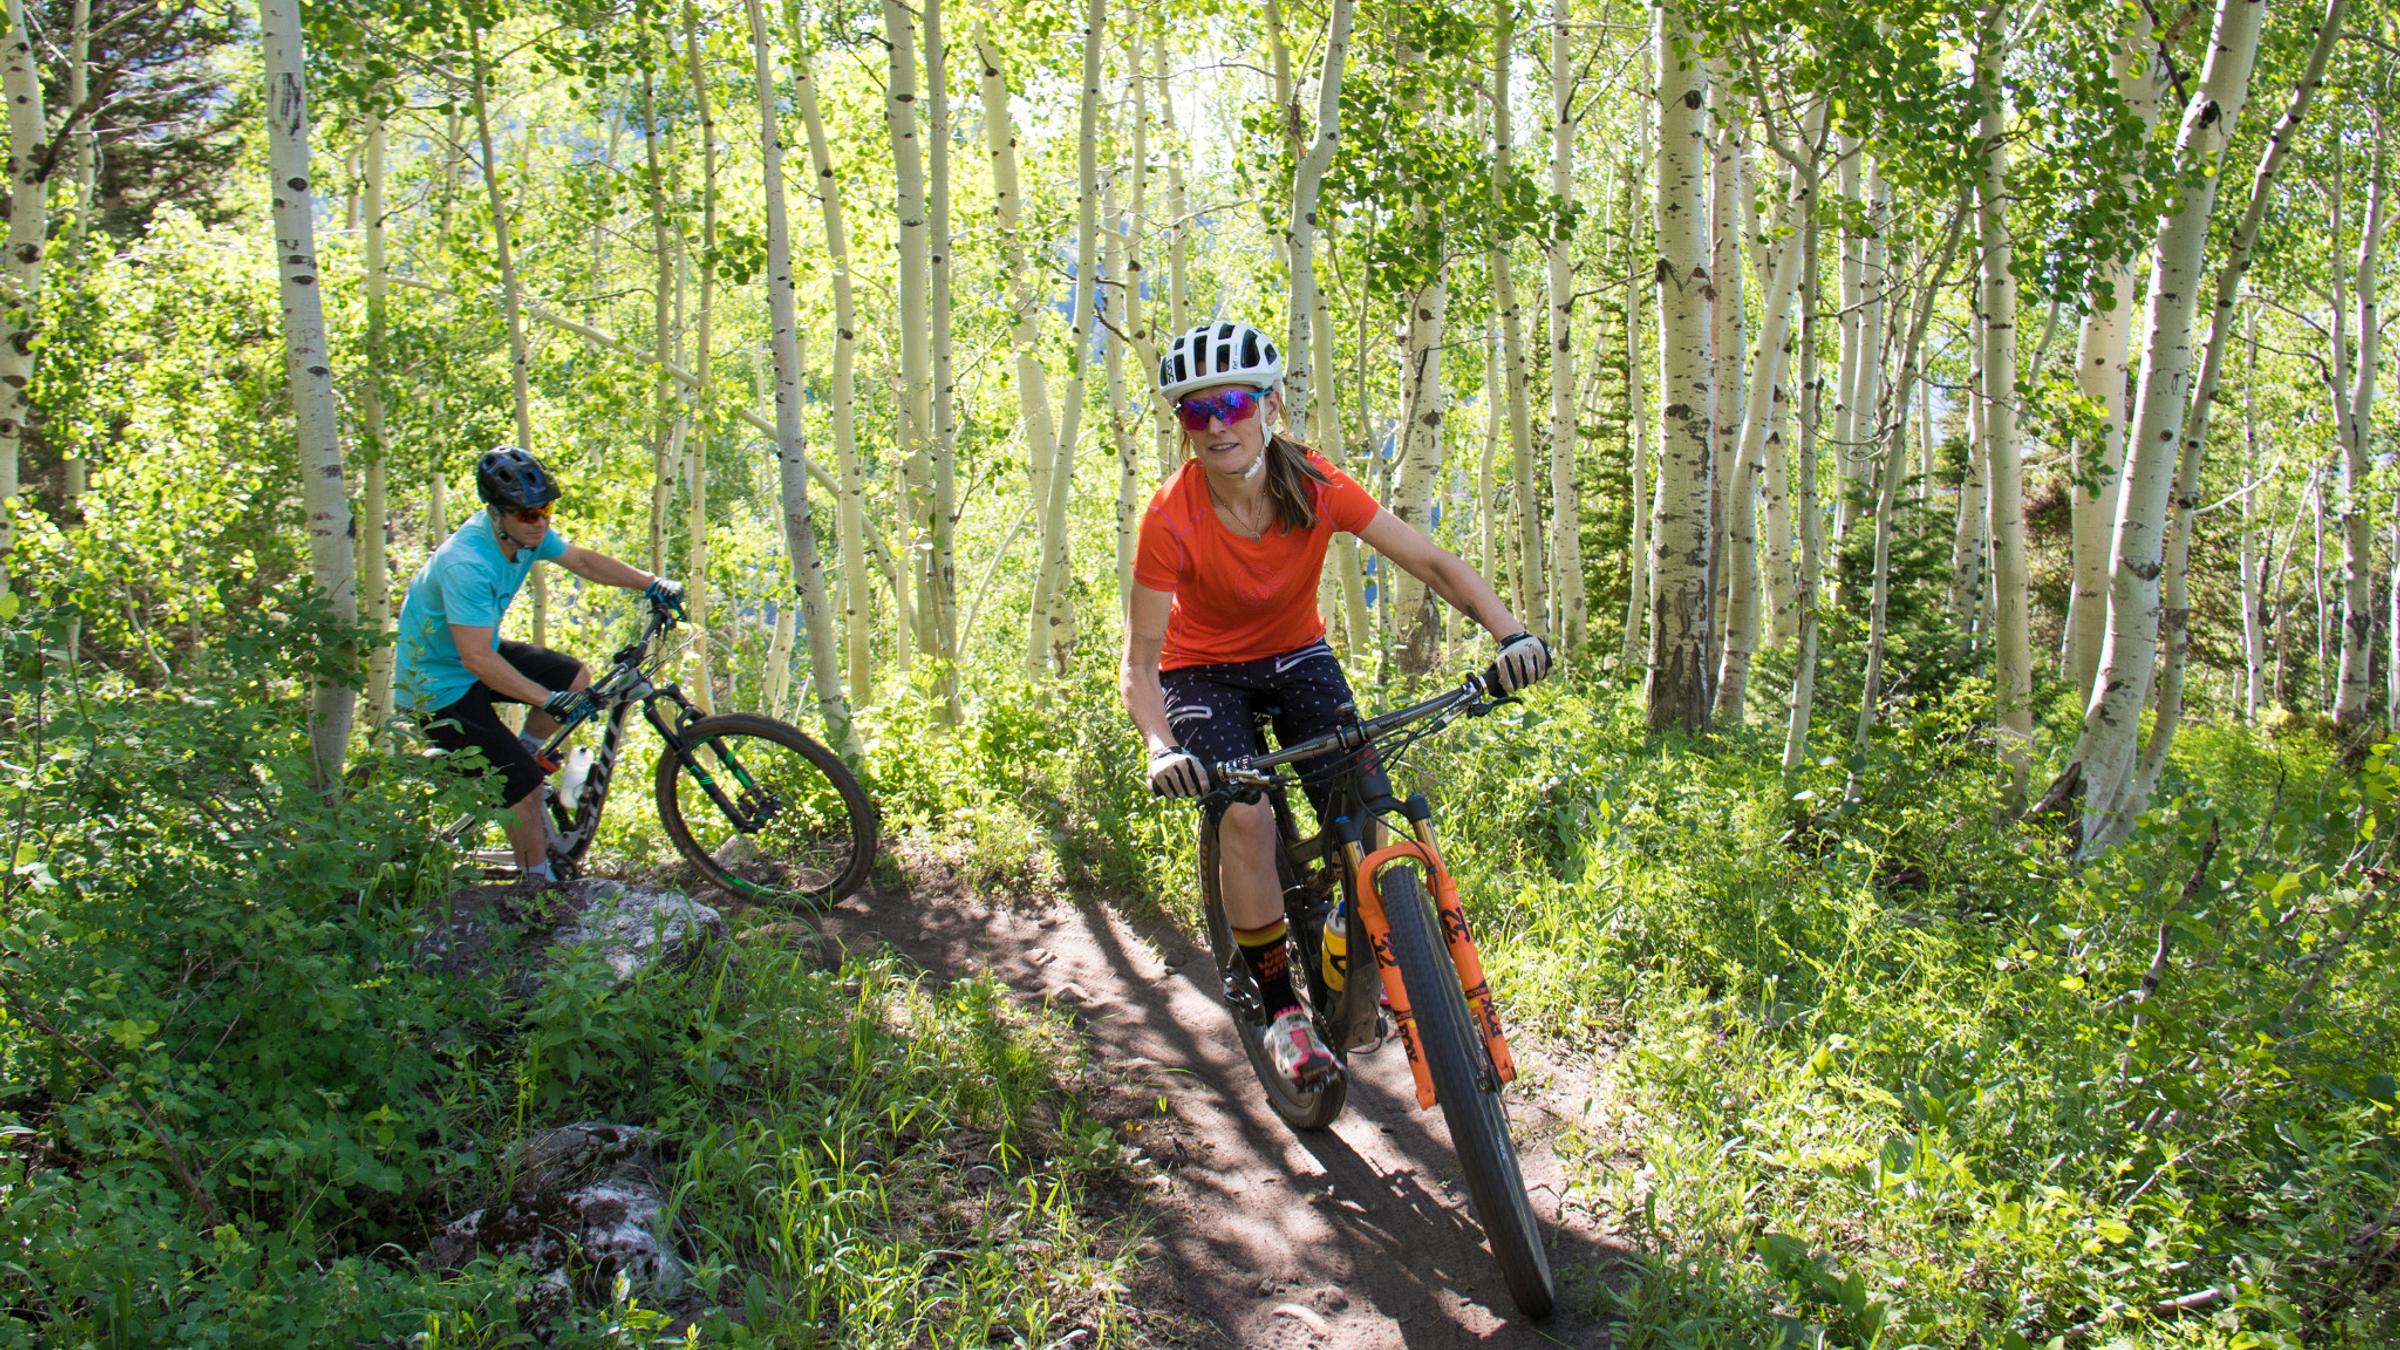 Two mountain bikers on Solitude trails